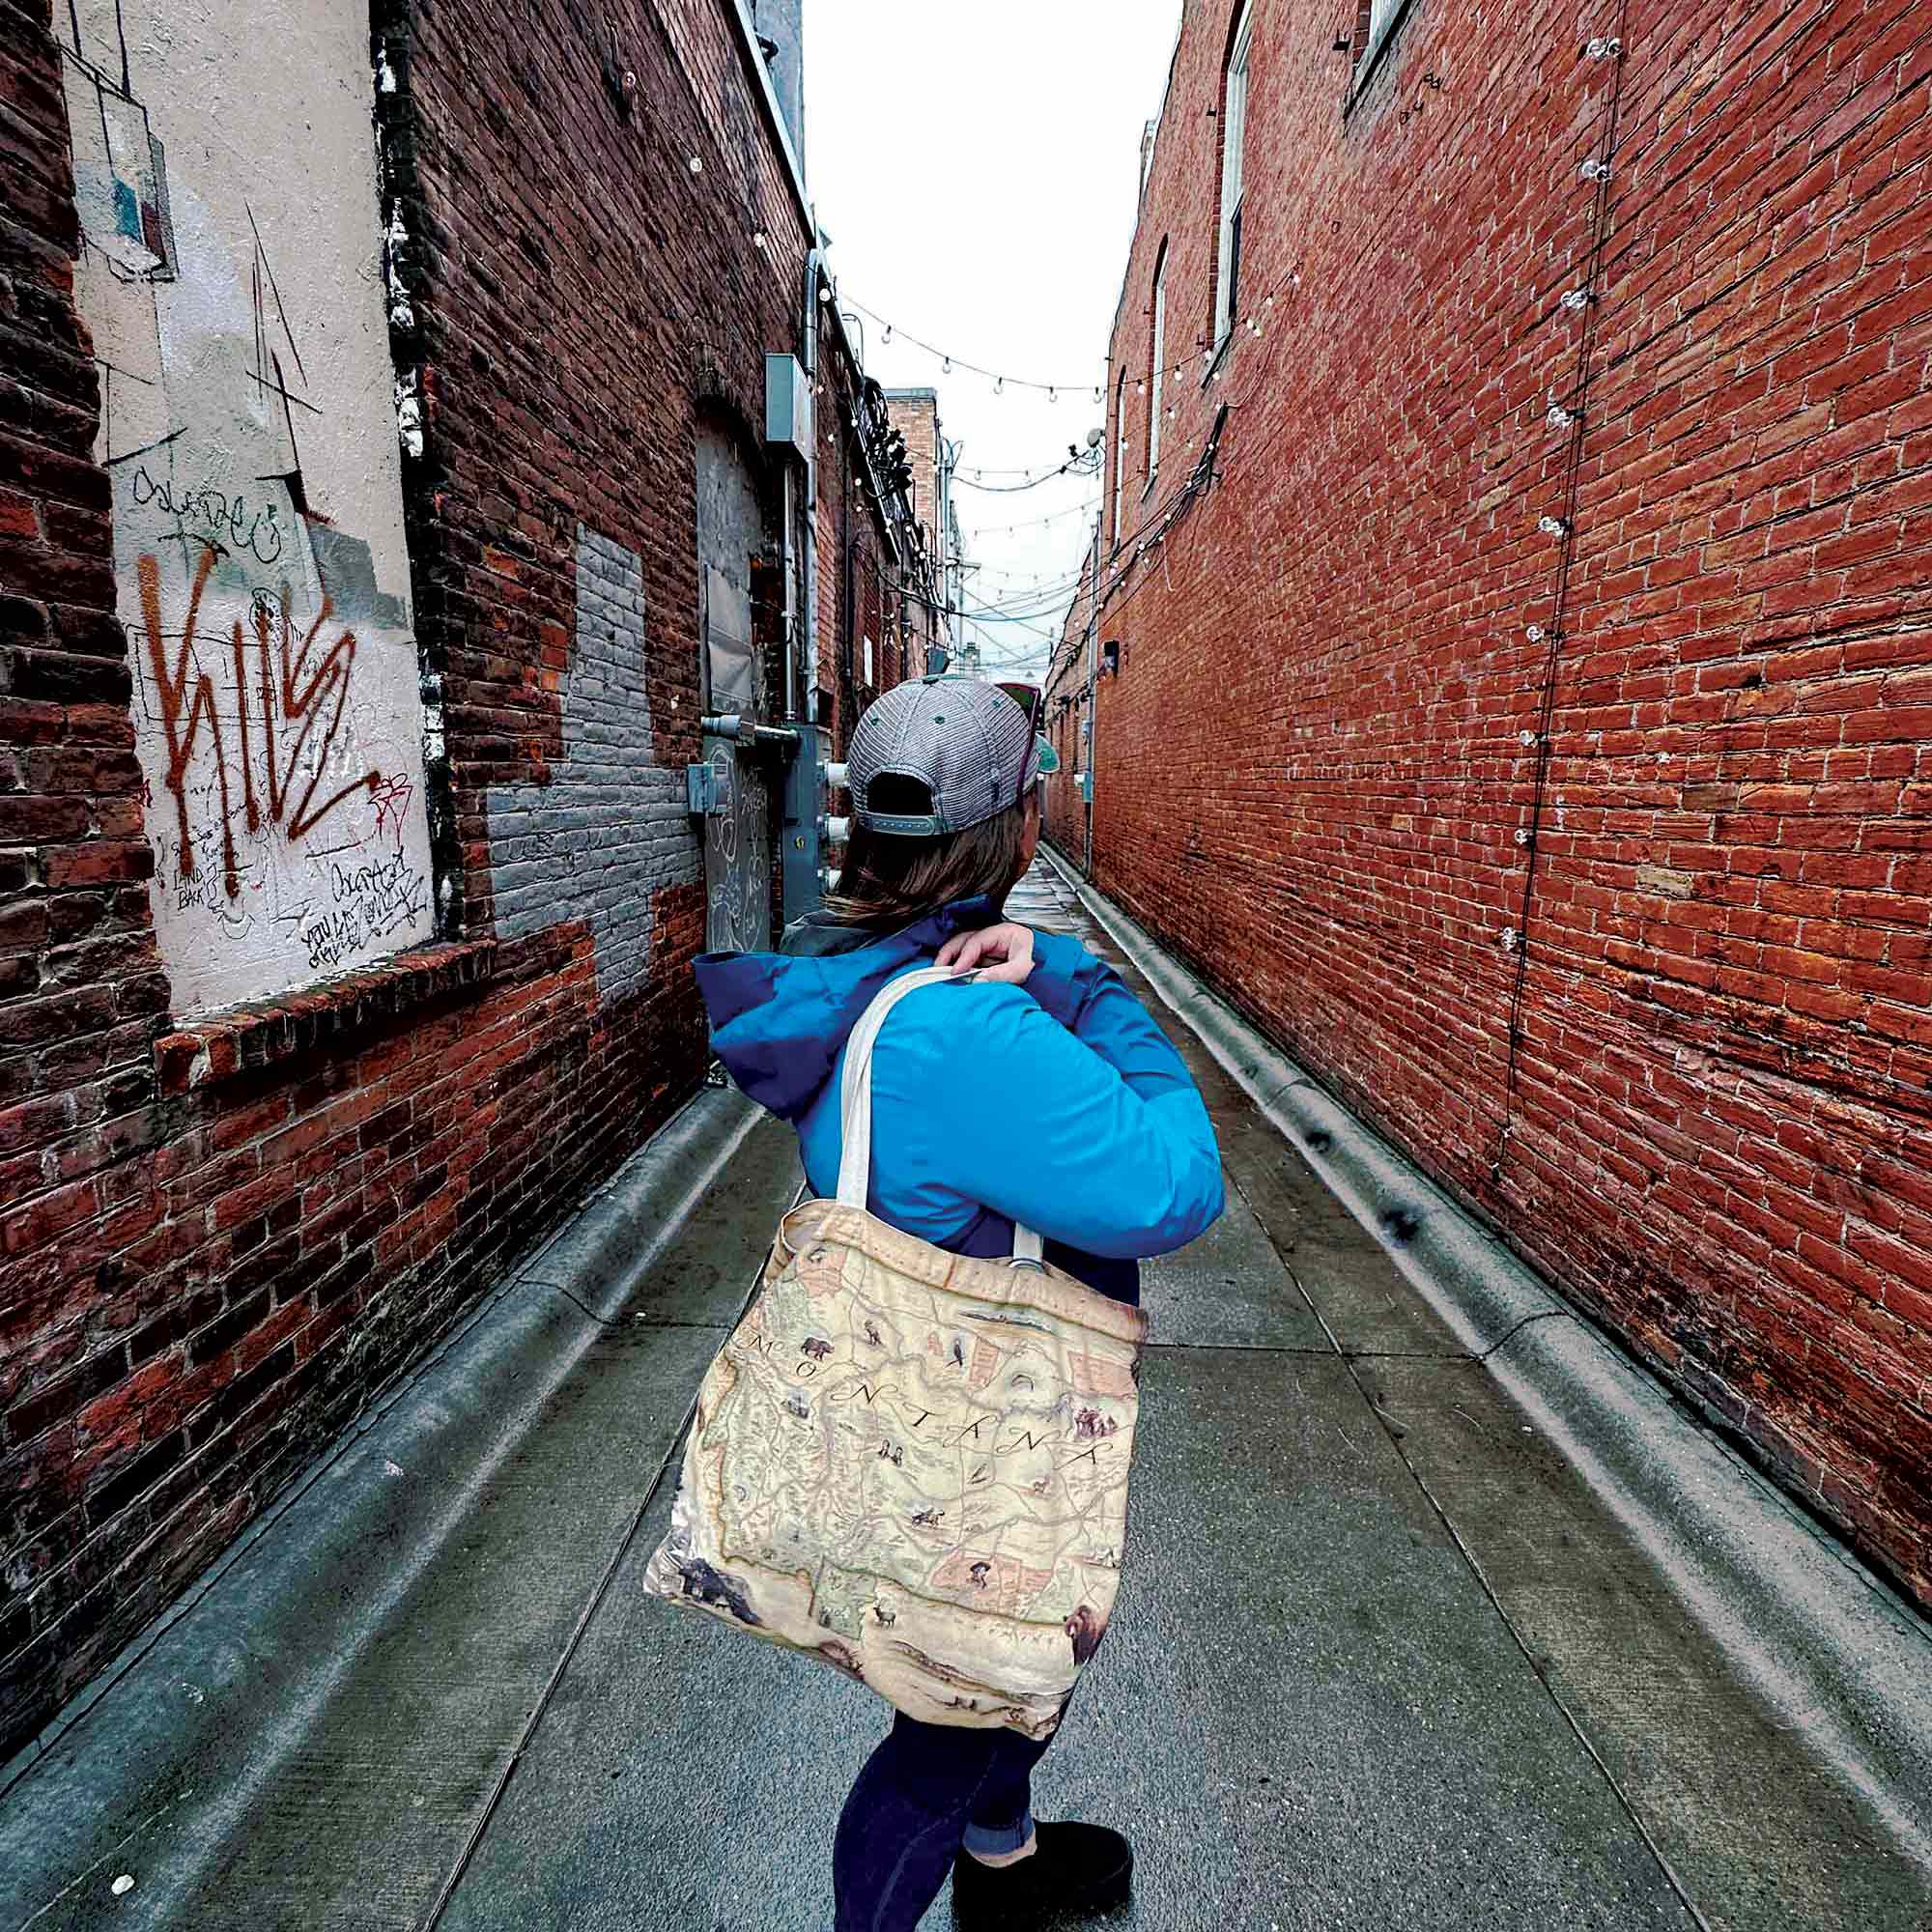 Women in Missoula, Montana alley with Montana Canvas Tote Bag by Xplorer Maps, amidst graffiti walls. Map showcases Sacajawea, Lewis & Clark, Yellowstone, Glacier National Park, Flathead Lake, wildlife like grizzly bear, bald eagle, elk, and cities such as Missoula, Bozeman, Helena, Whitefish.